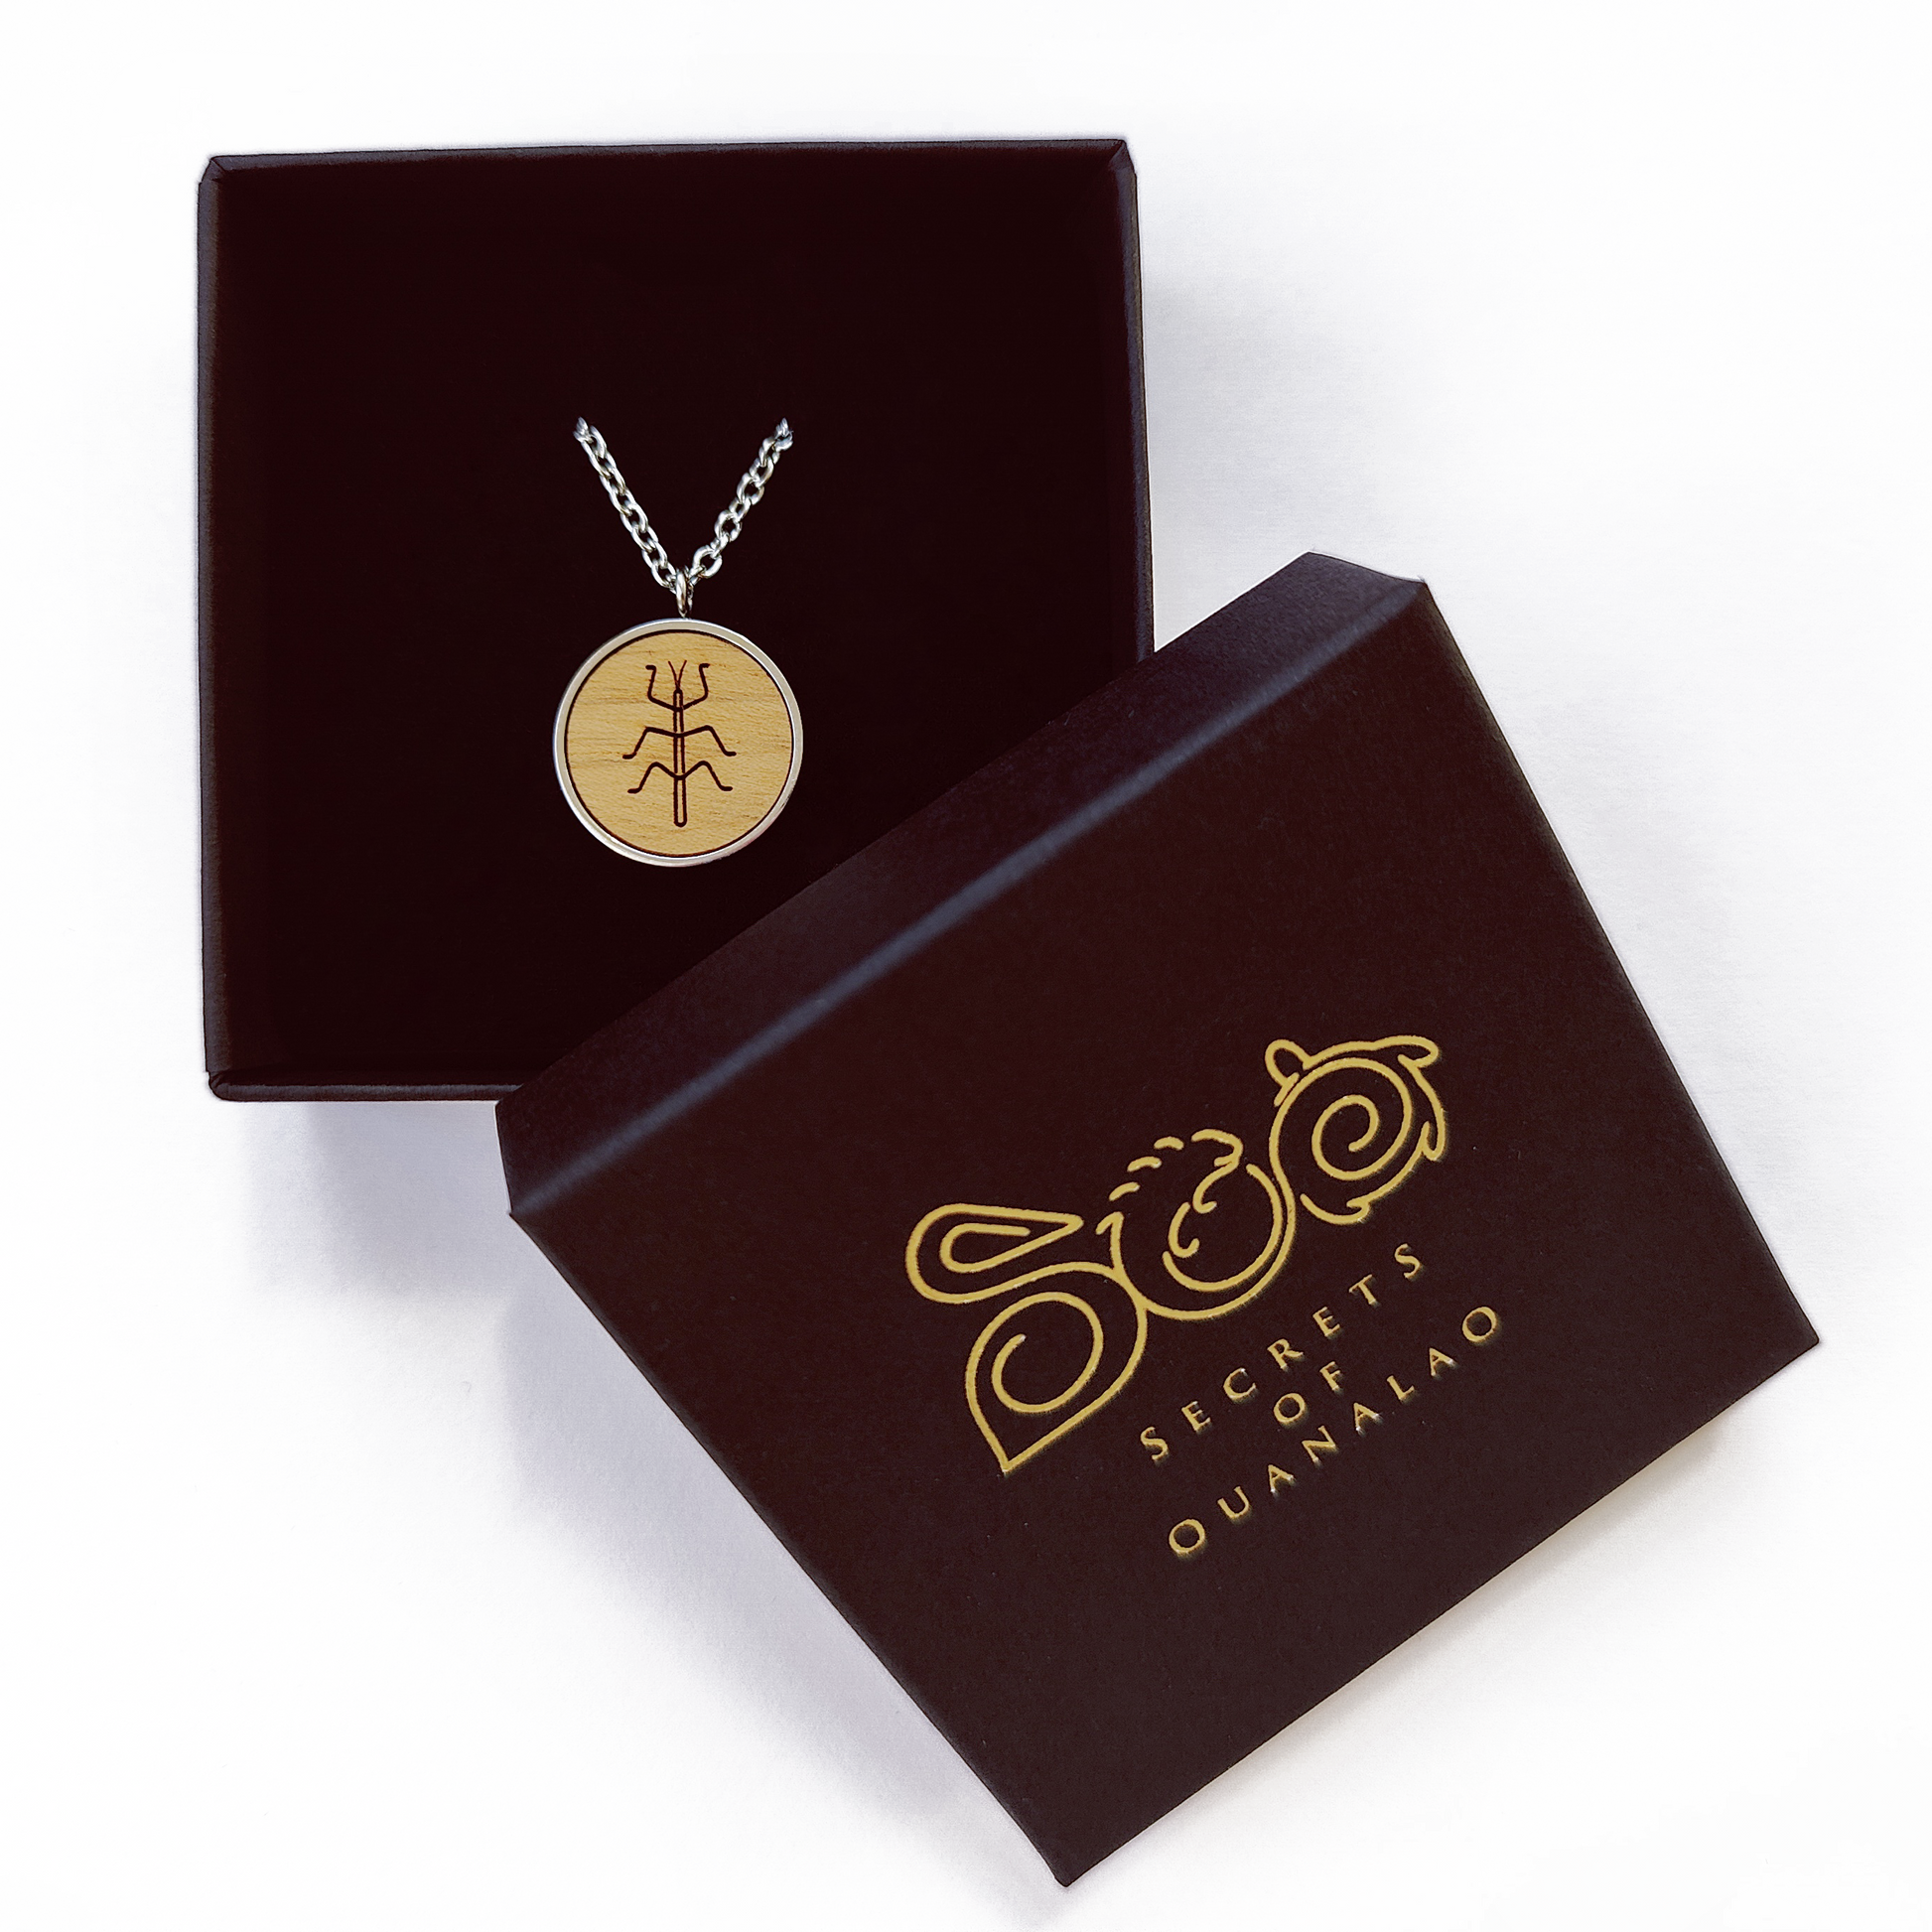 Nut wood stick insect pendant necklace with stainless steel chain. All our eco-friendly necklaces are delivered in FSC certified jewelry boxes with sustainable foam.